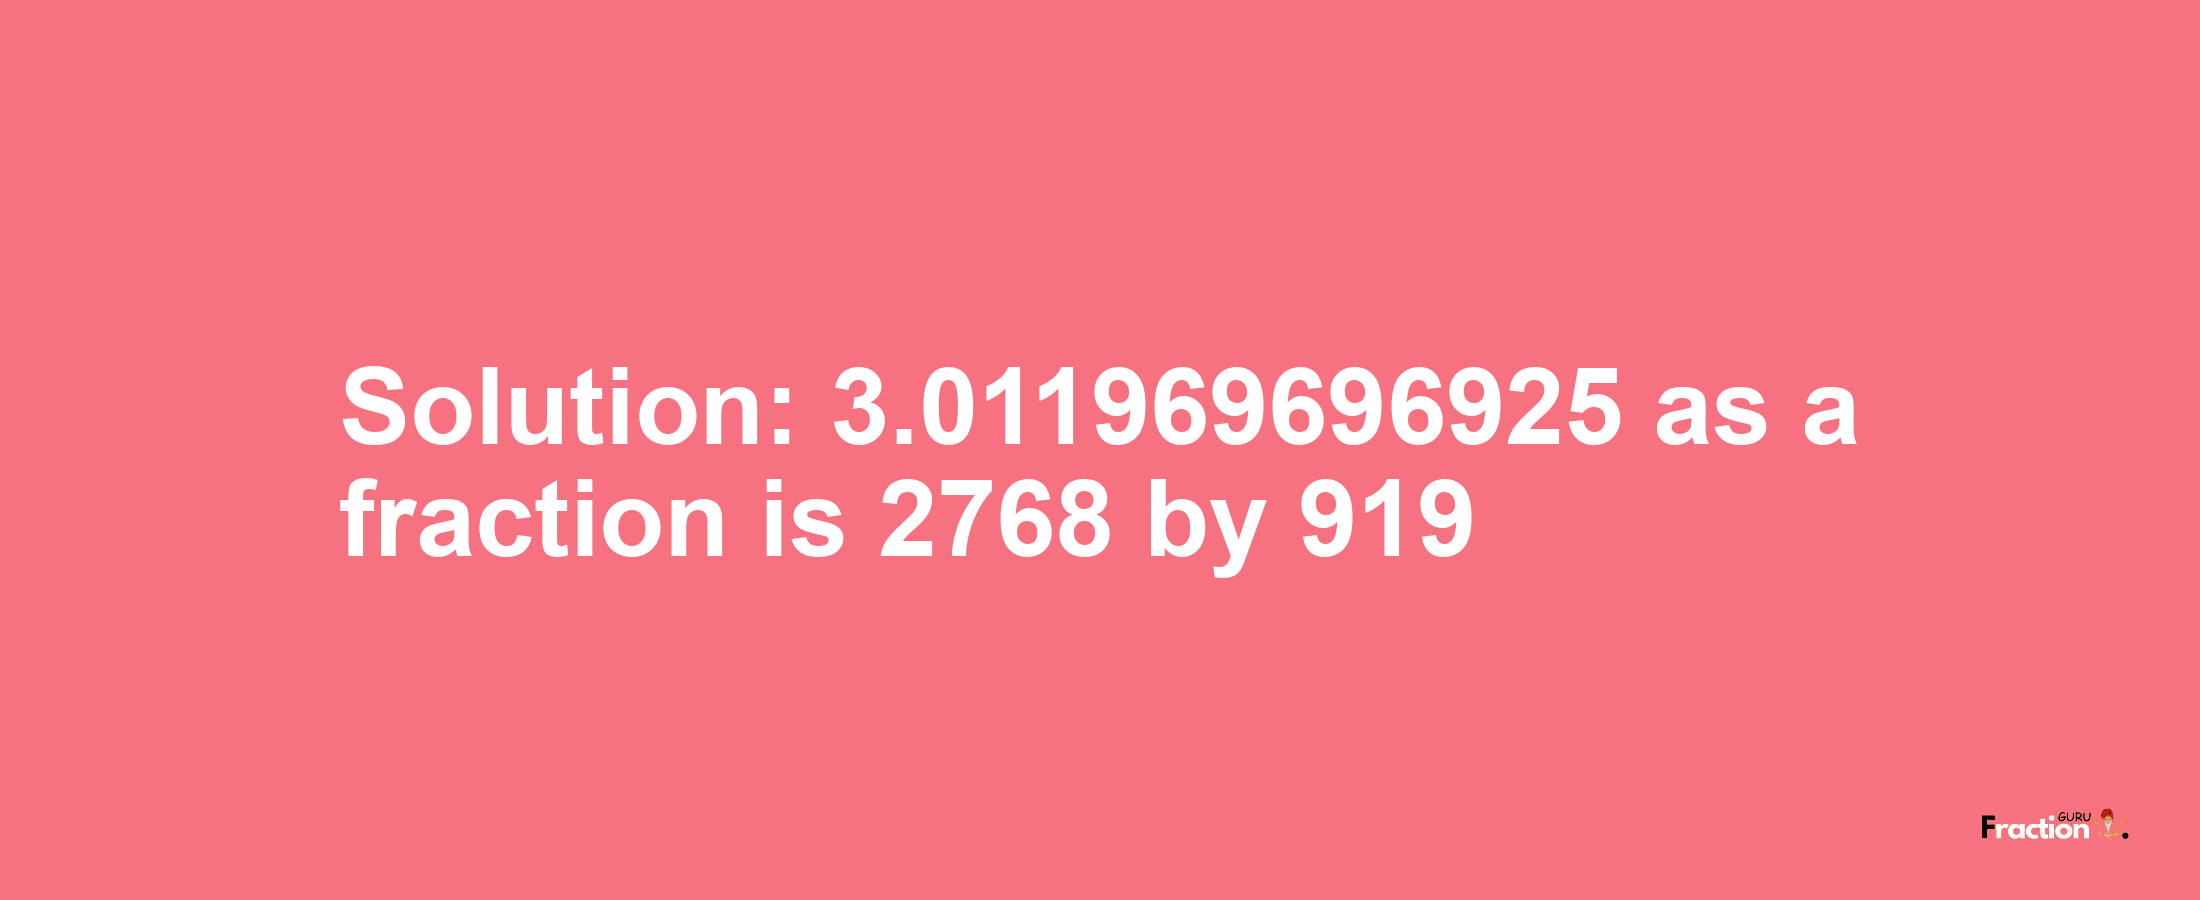 Solution:3.011969696925 as a fraction is 2768/919